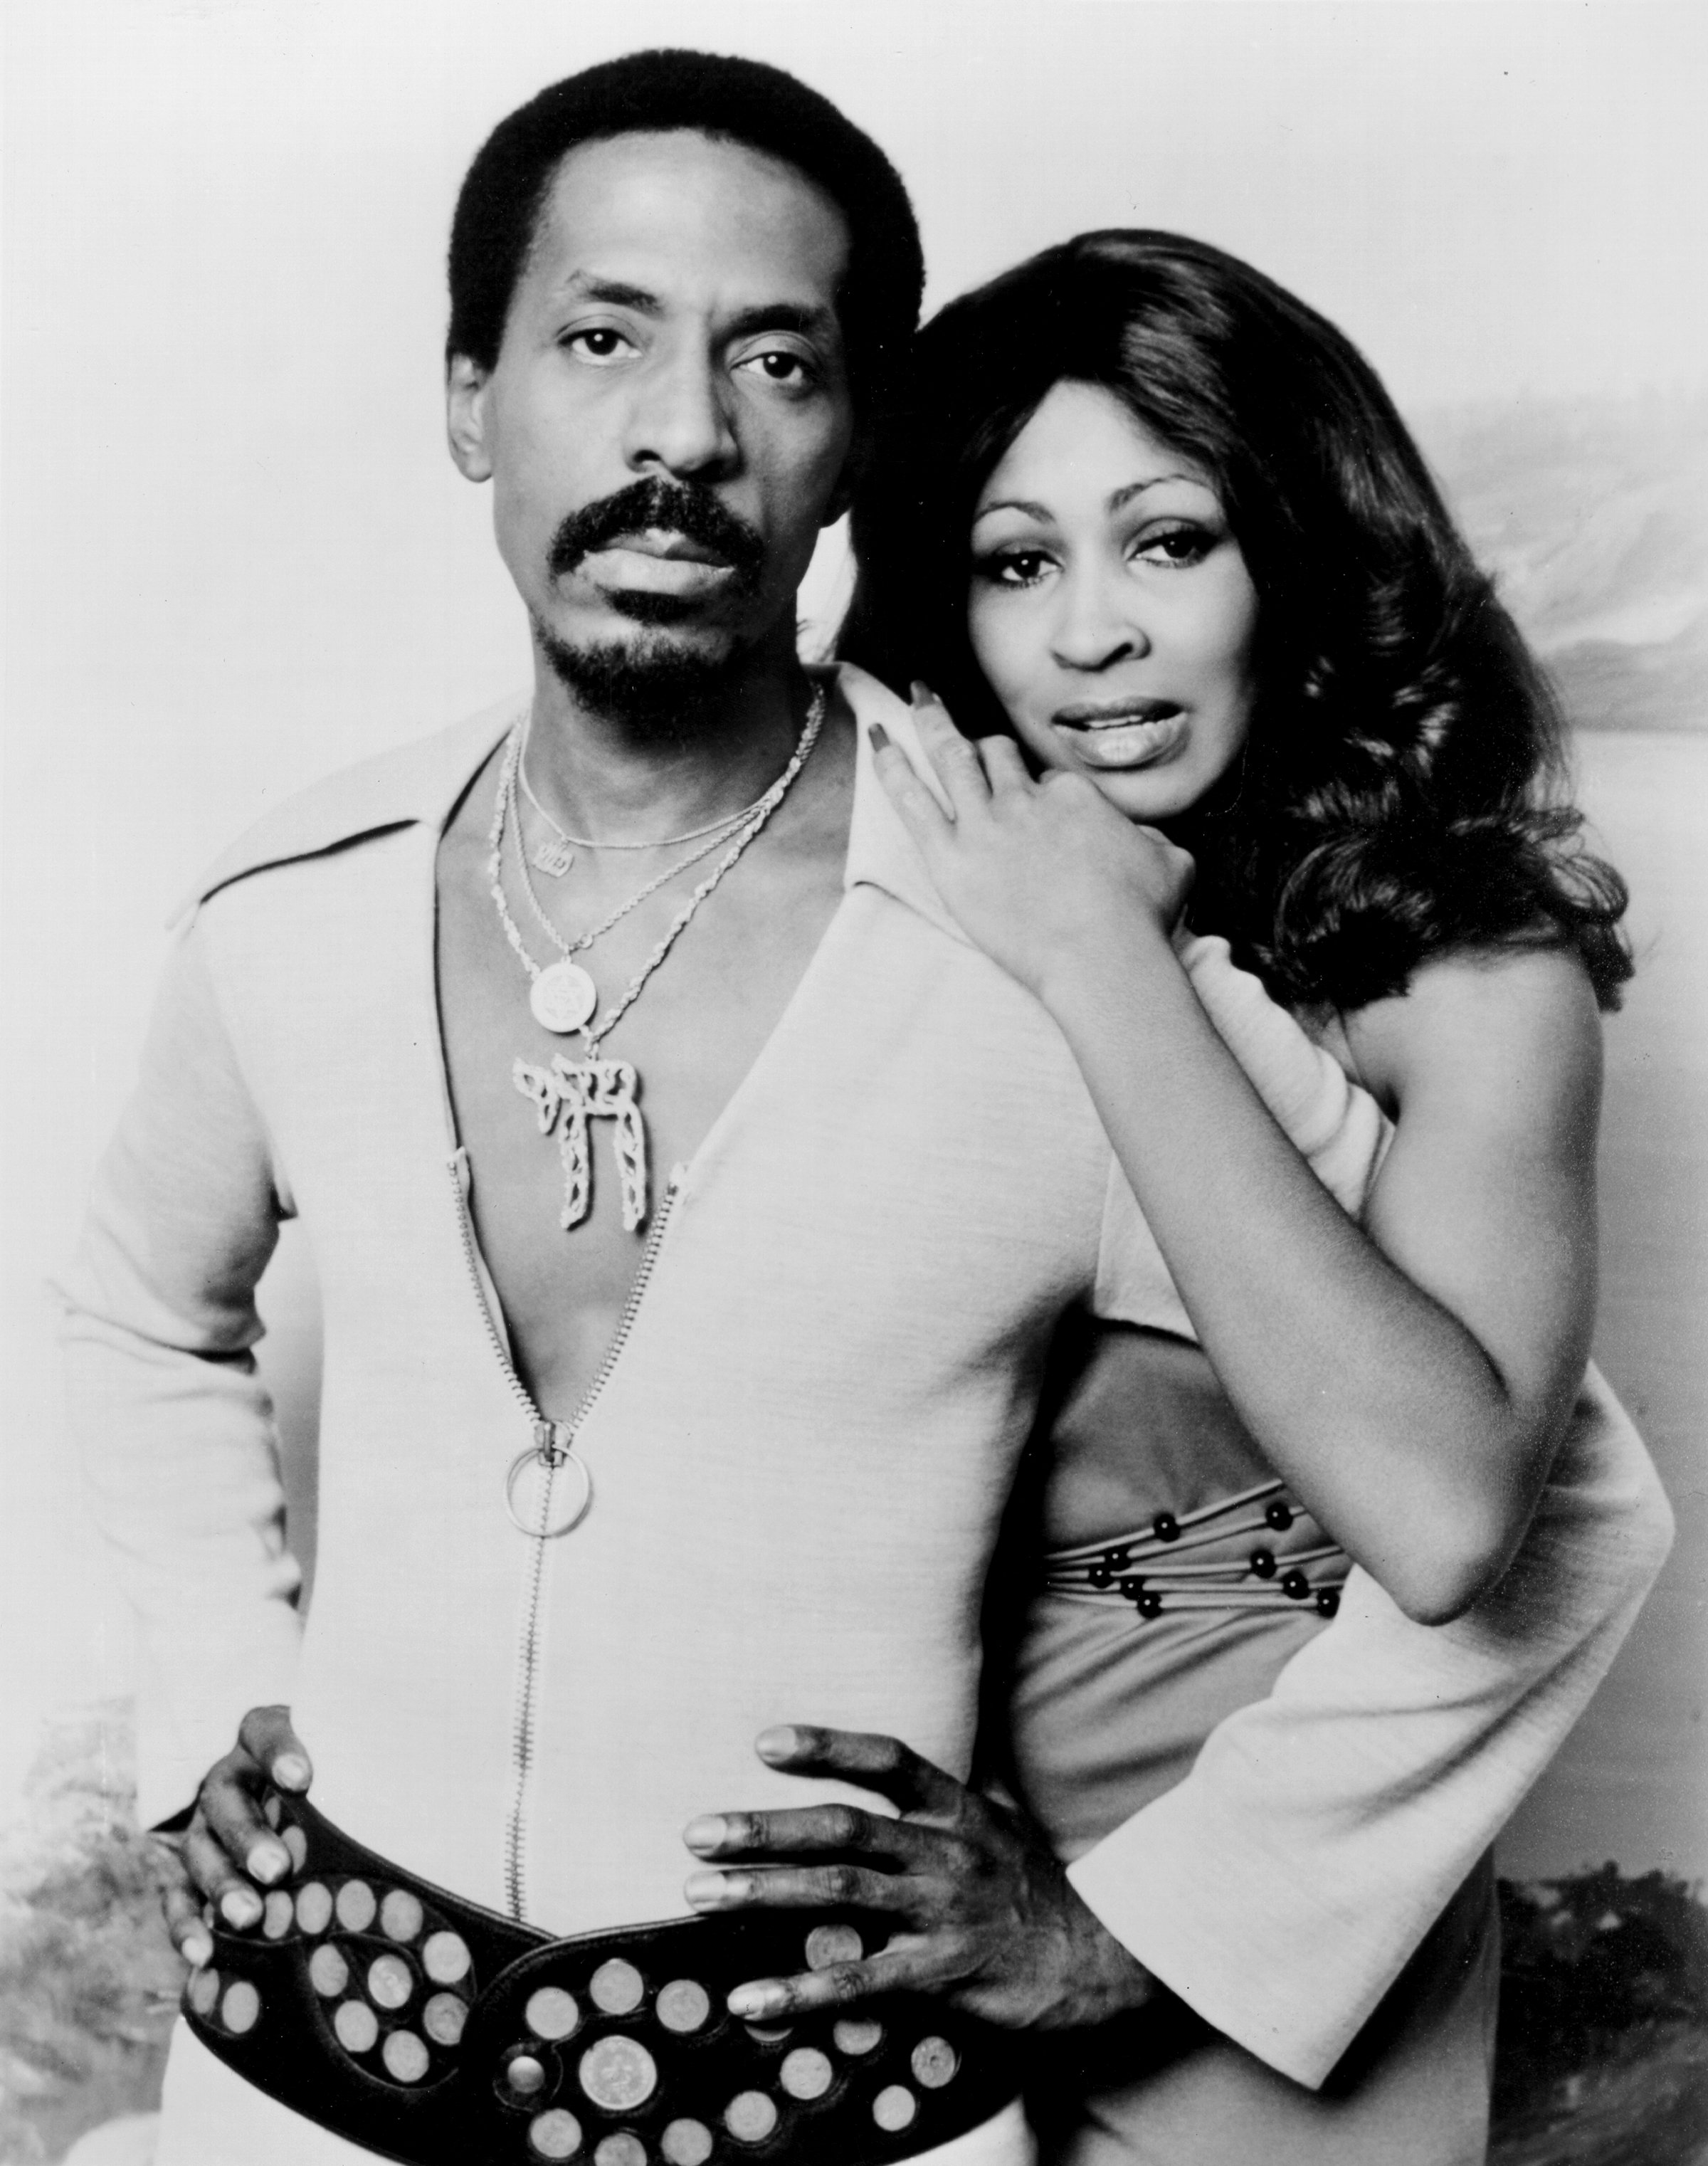 Tina Turner with ex husband Ike Turner photographed in circa 1972. | Source: Getty Images